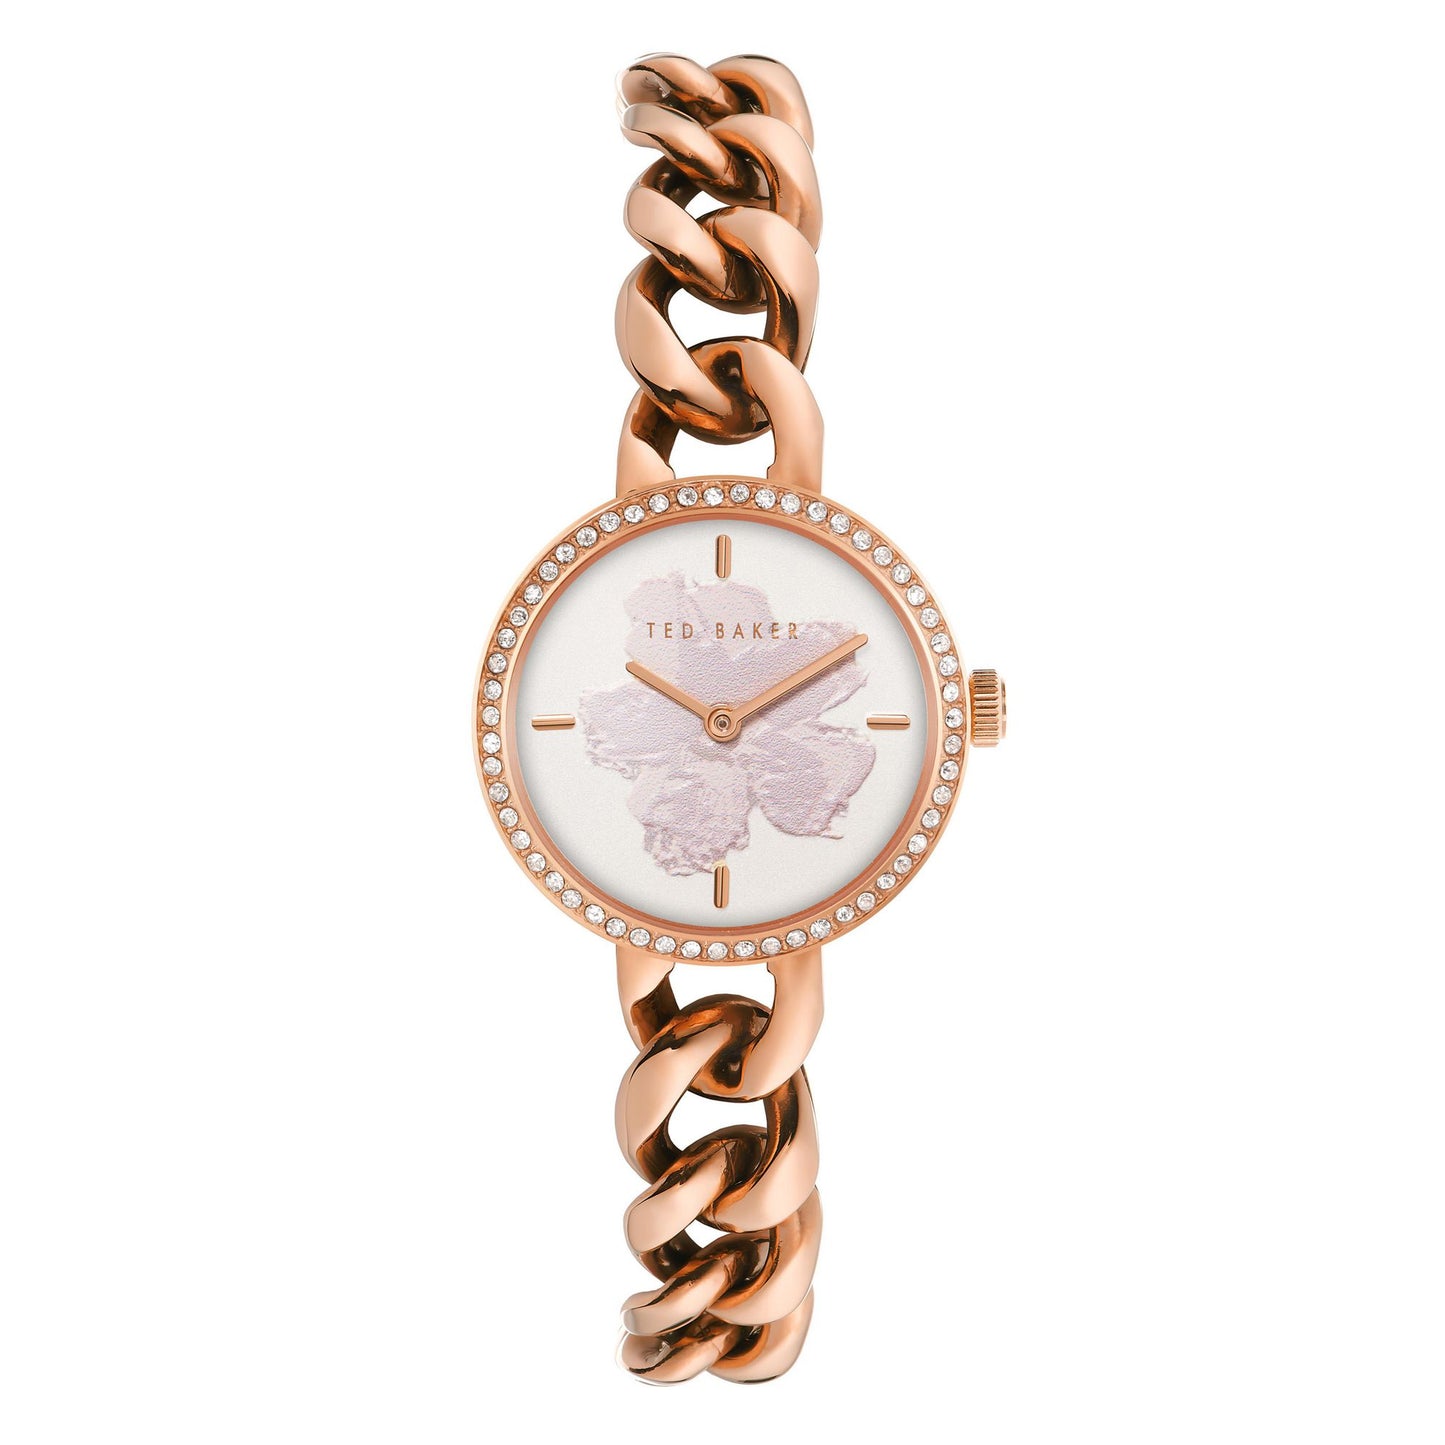 Ted Baker Champagne Dial Women Watch - BKPMSS204